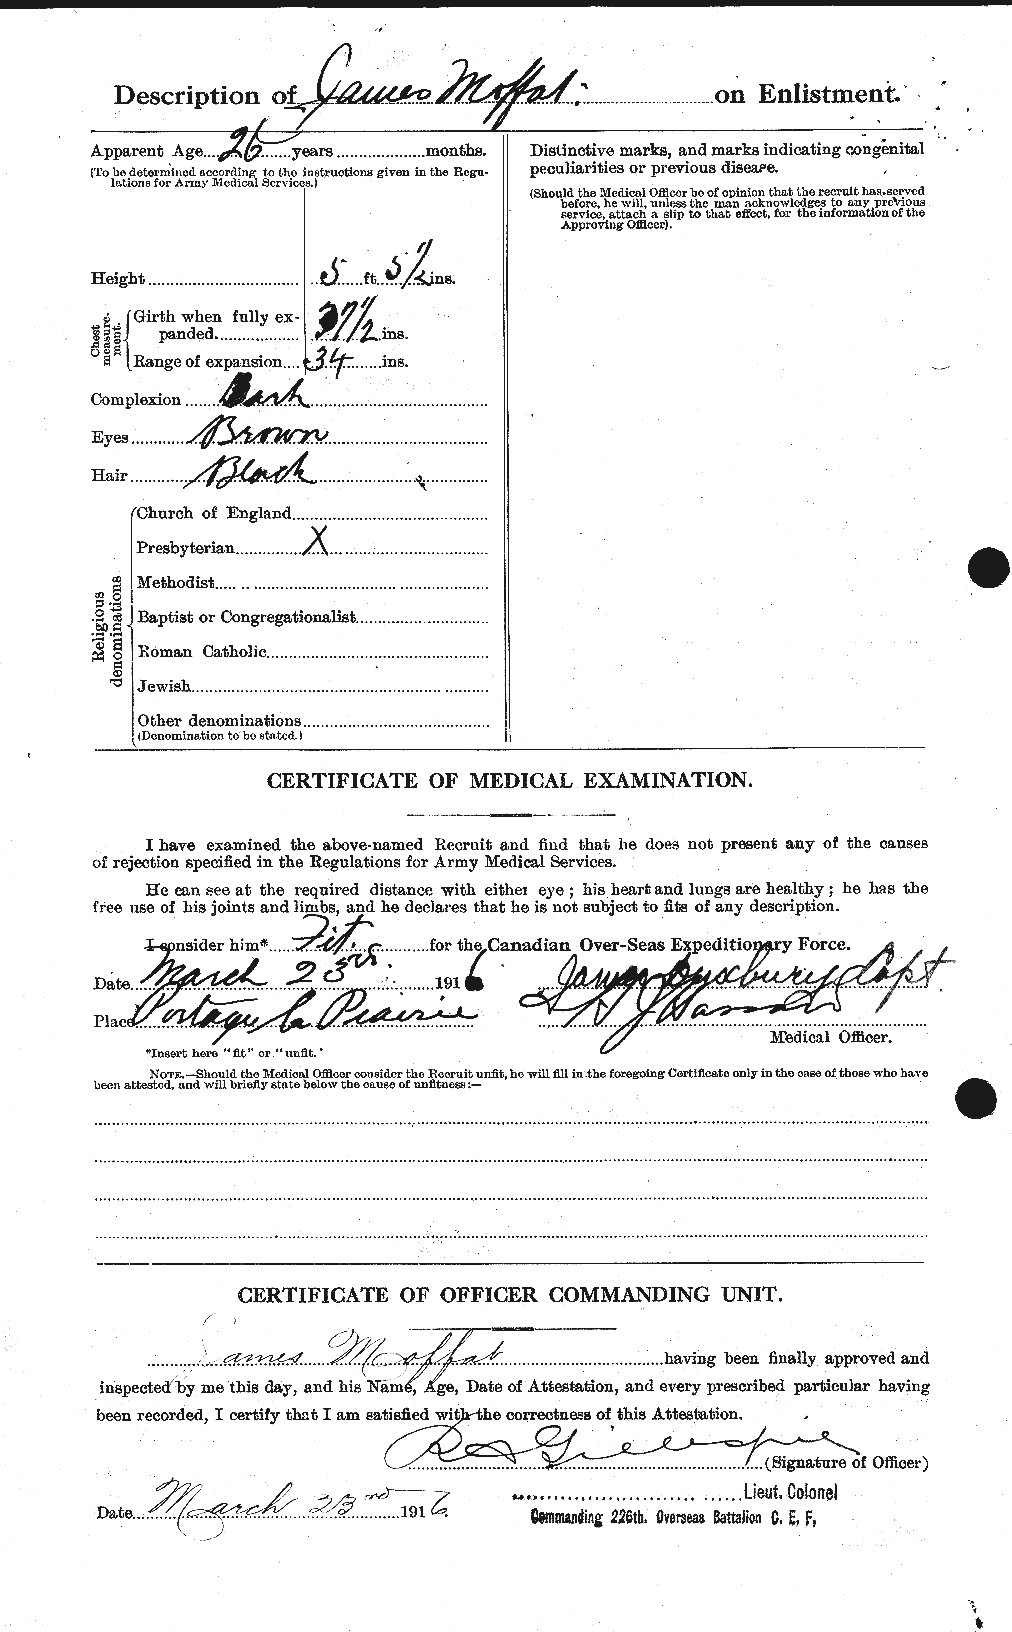 Personnel Records of the First World War - CEF 499029b